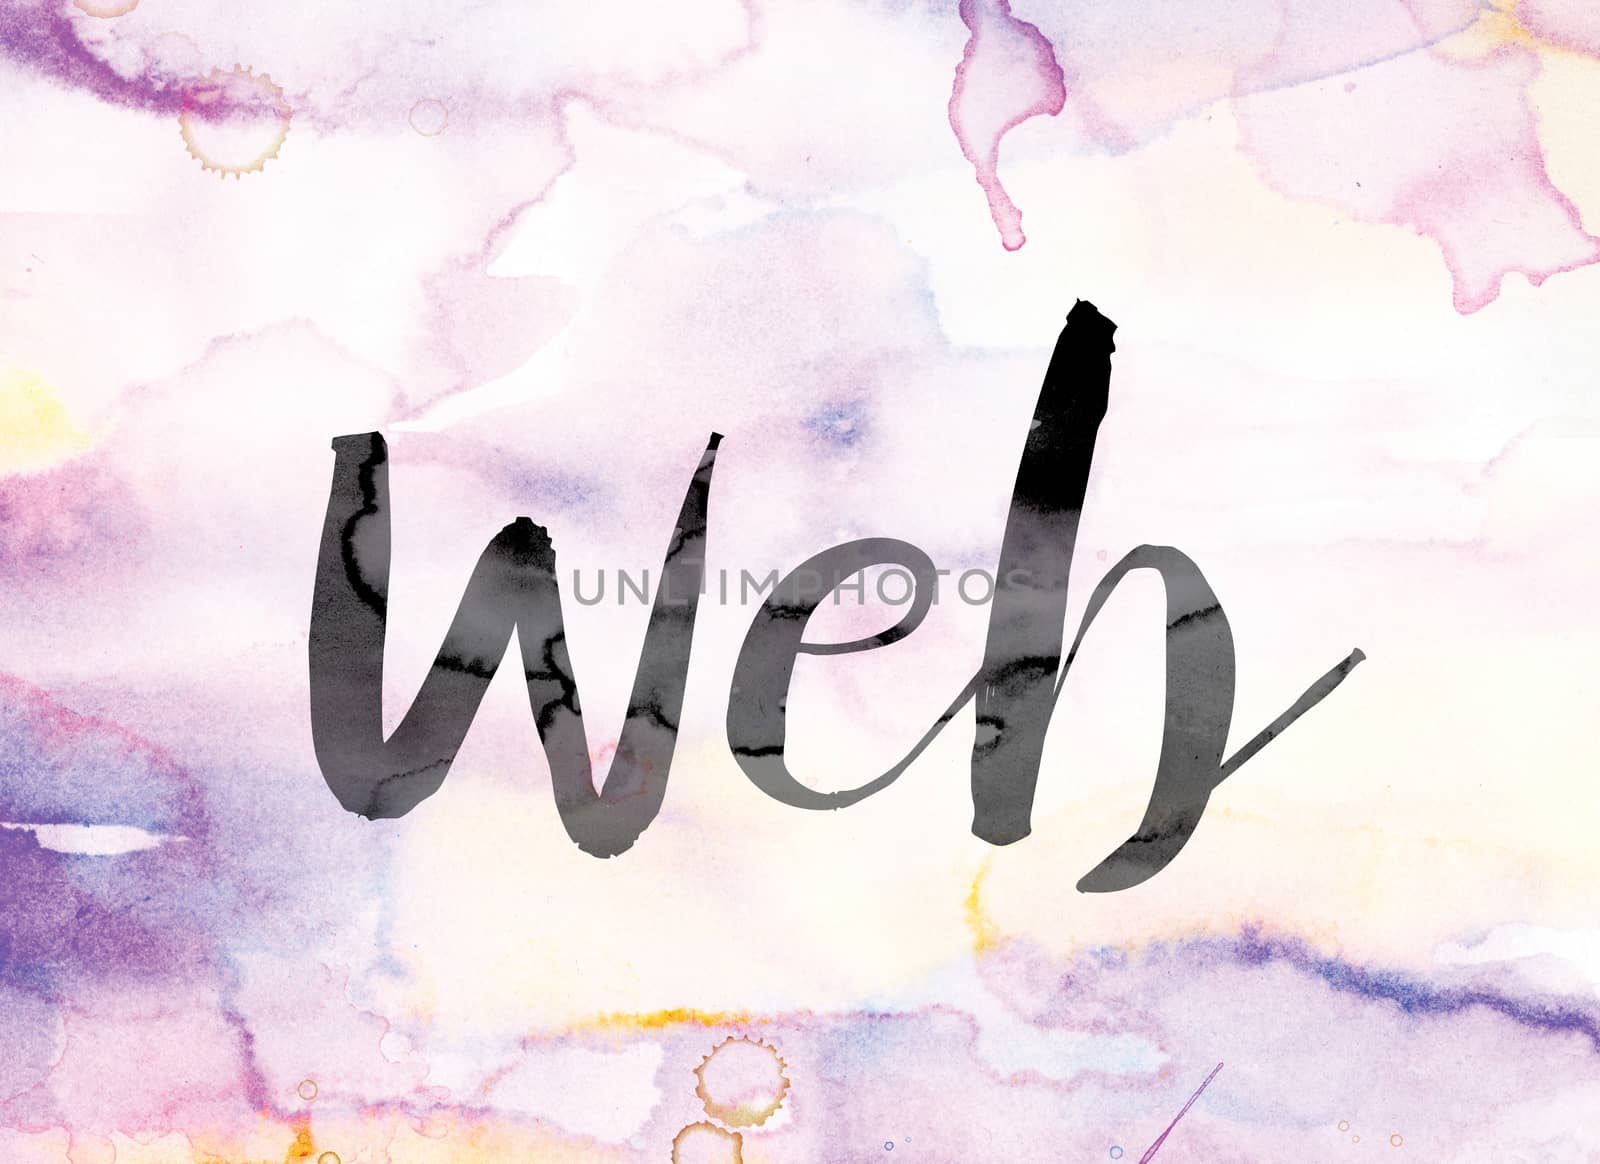 The word "Web" painted in black ink over a colorful watercolor washed background concept and theme.